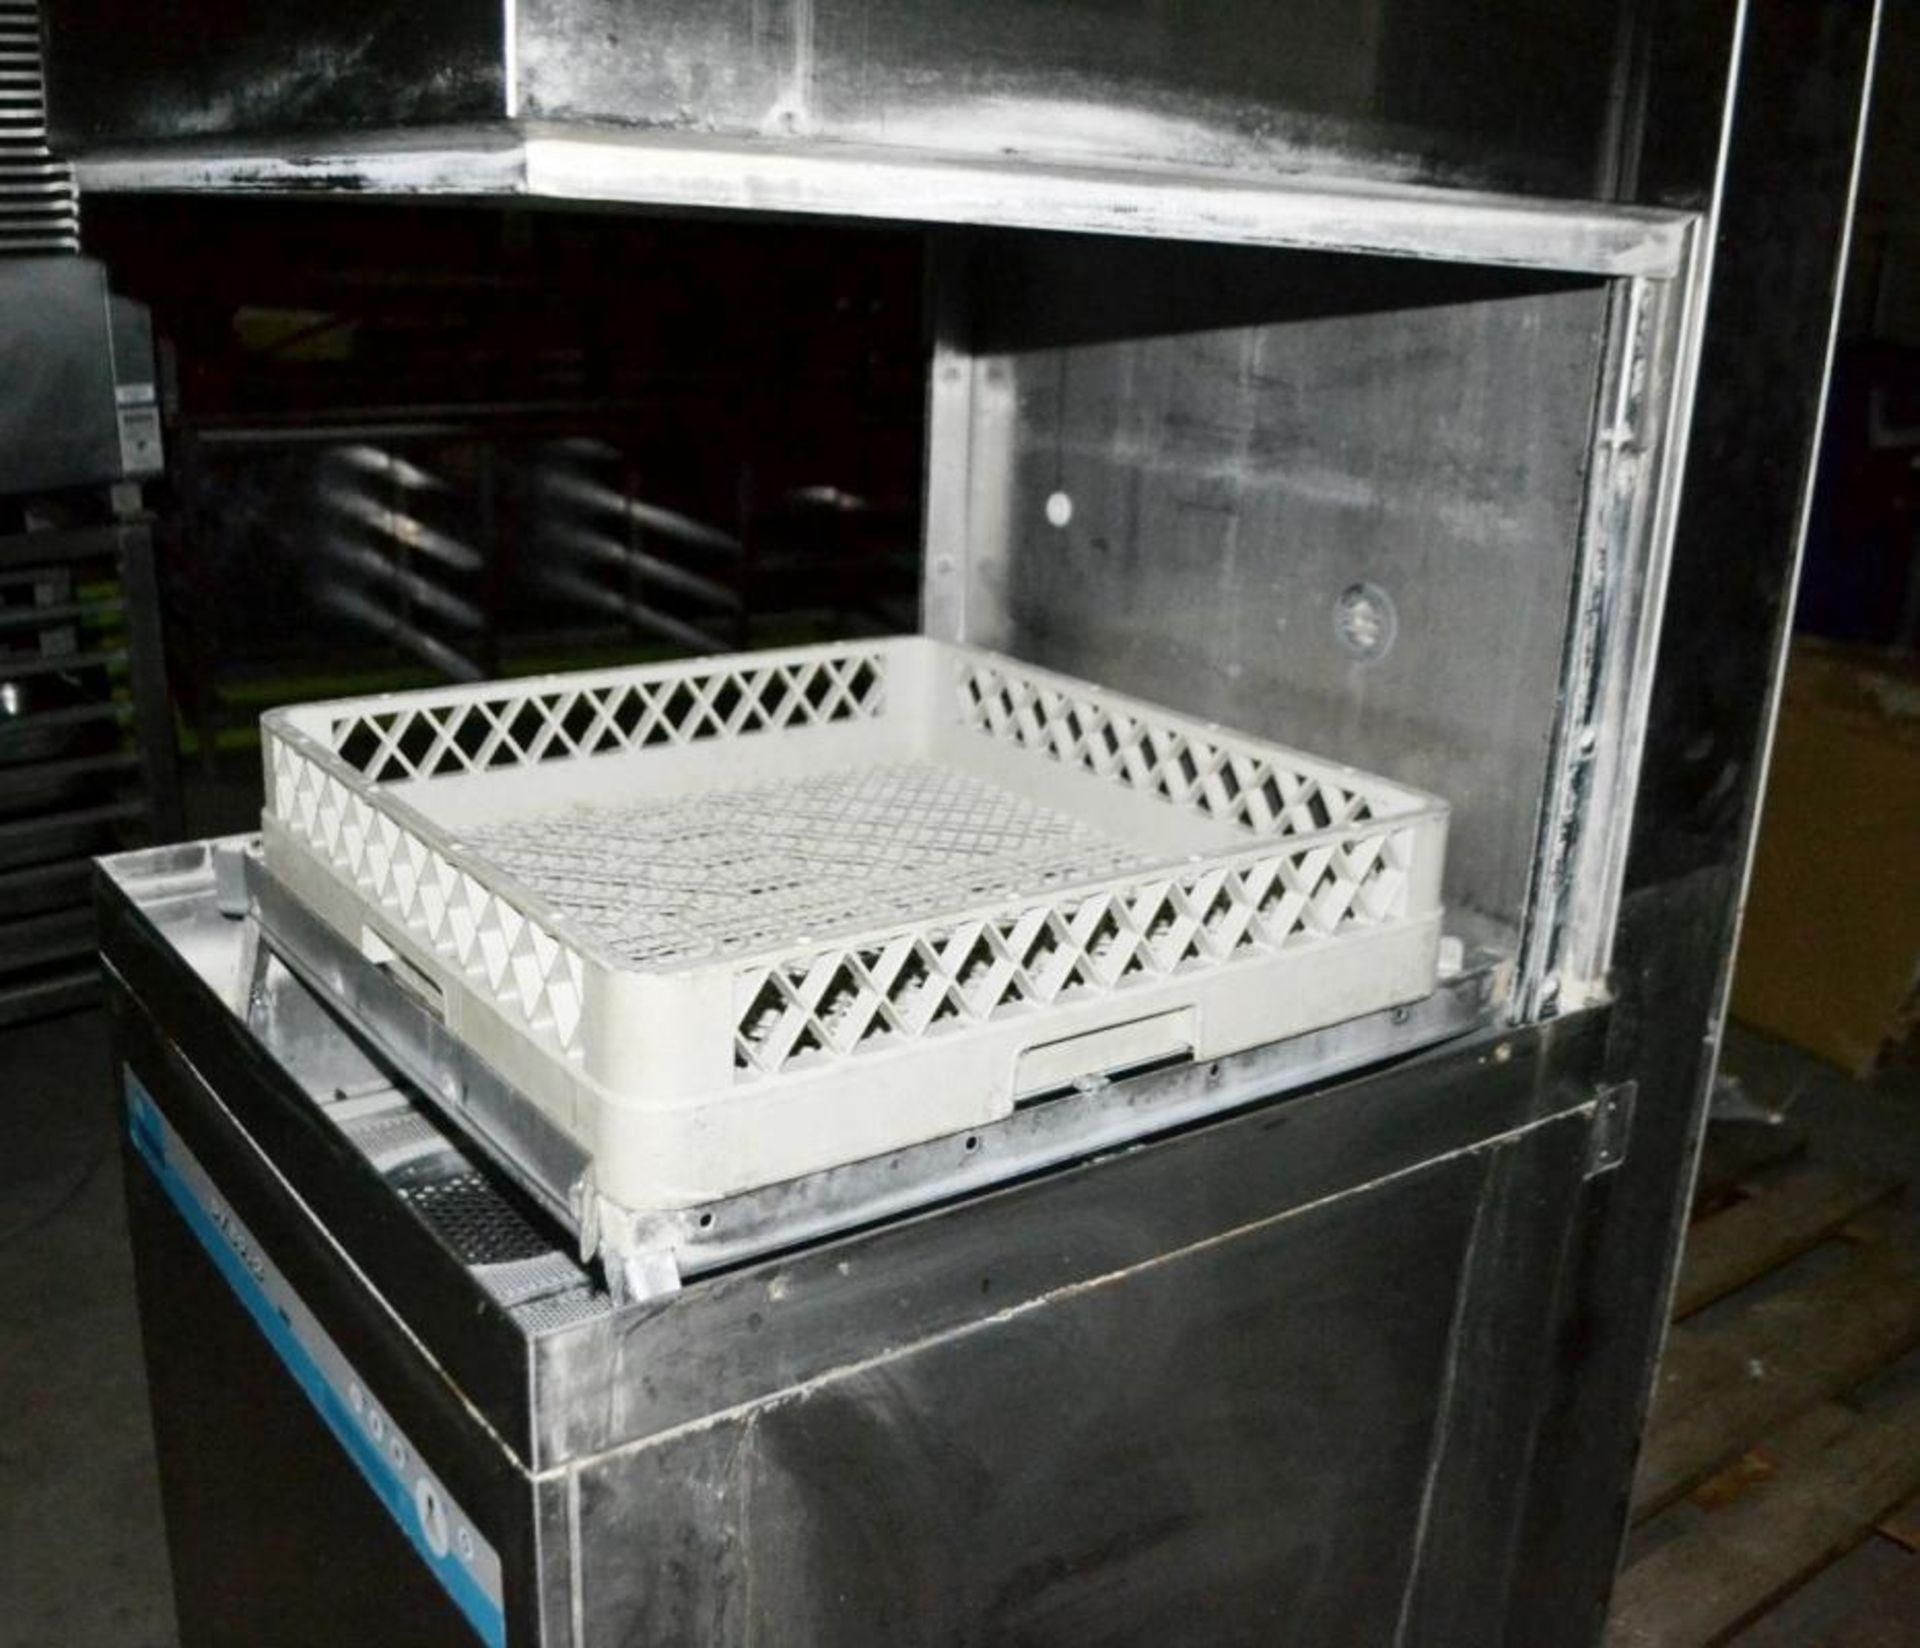 1 x MEIKO DV80.2 Pass Through Dishwasher With 2 x Modules And Inlet Sink - CL011 - Dimensions: 63 x - Image 4 of 10